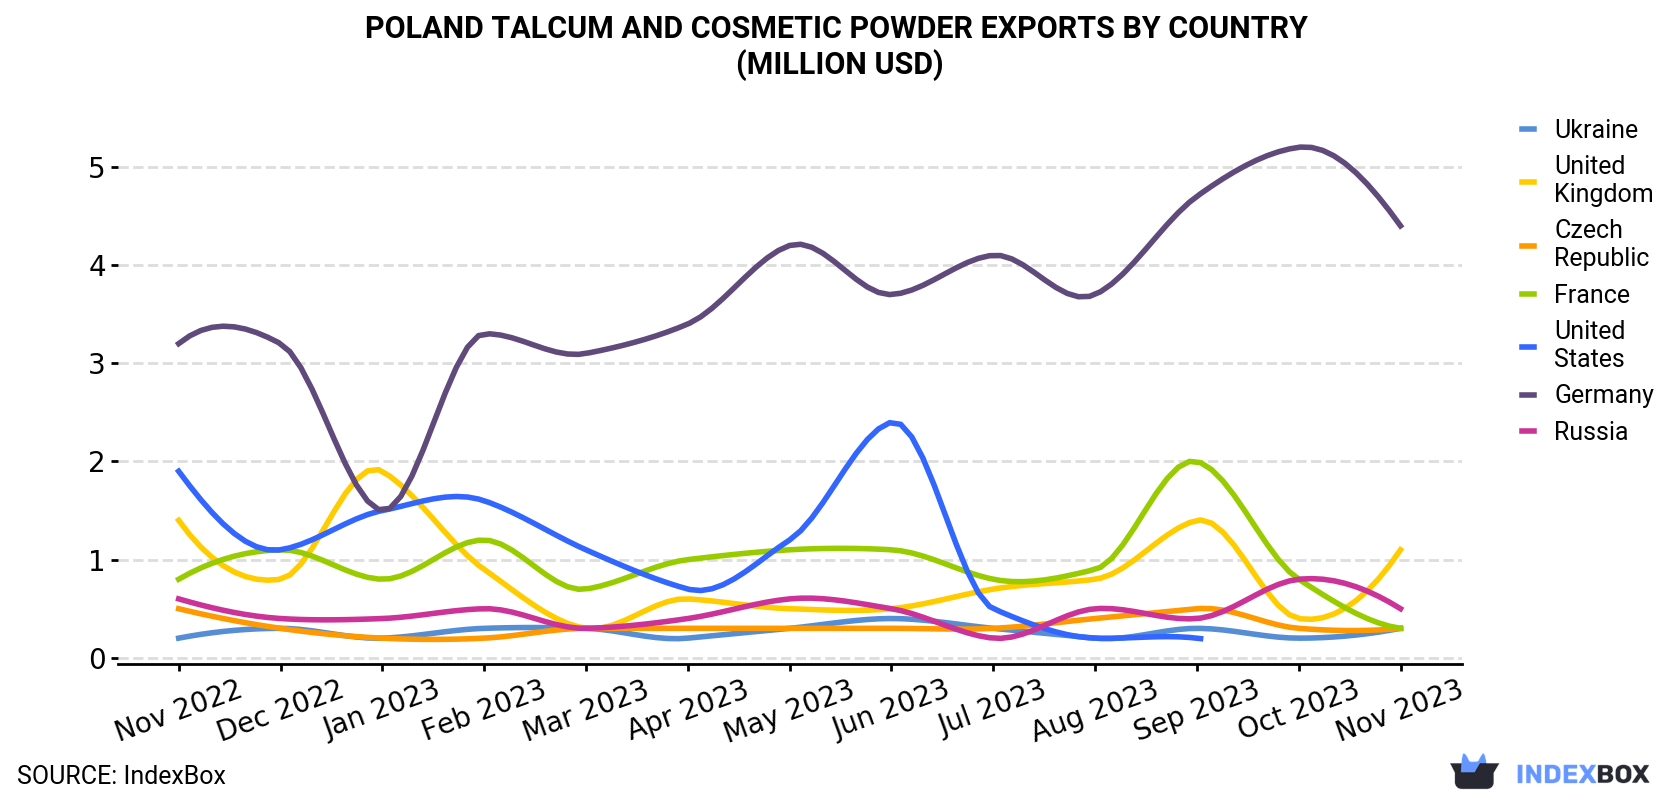 Poland Talcum and Cosmetic Powder Exports By Country (Million USD)